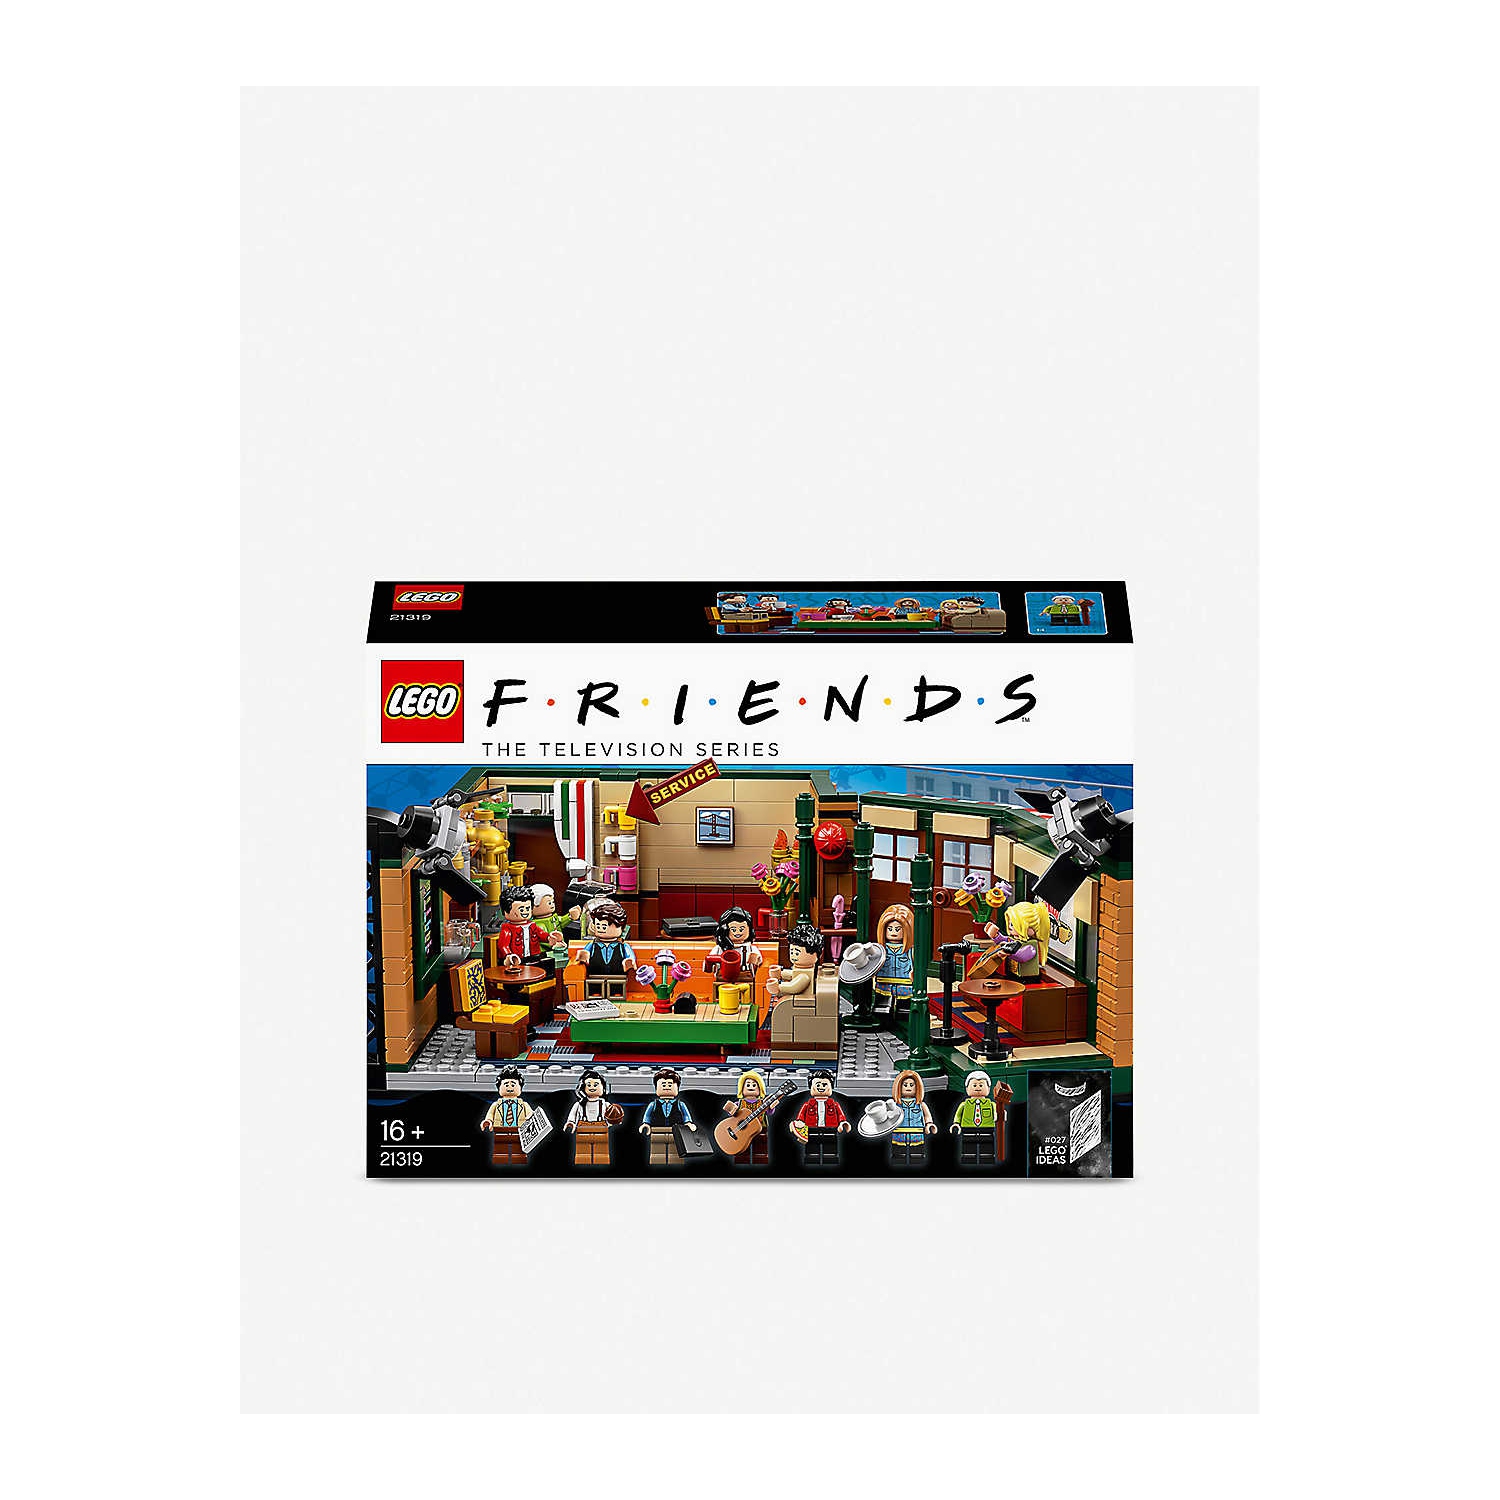 LEGO 21319 Friends Central Perk Set for Ages 16 and up